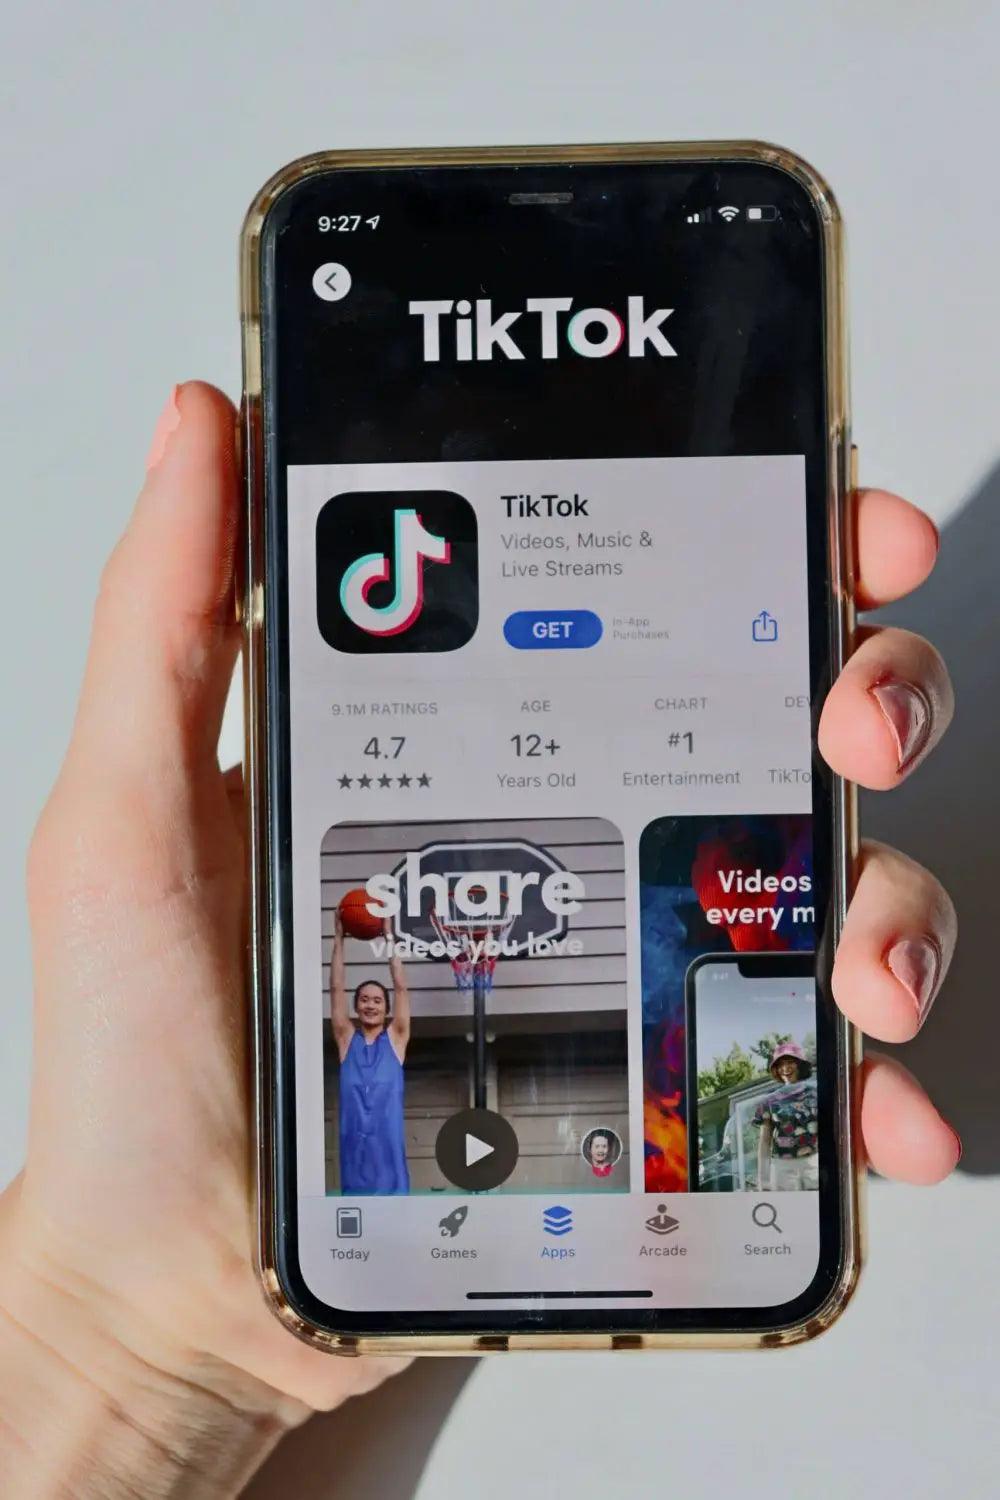 0 views tiktok;Why you are Getting 0 Views on TikTok Videos;The Reasons Why You May Have 0 Views on TikTok Videos;Inappropriate Content;Inappropriate Content;Copyright Infringement;Virtual Private Network;tiktok;0 Views on TikTok